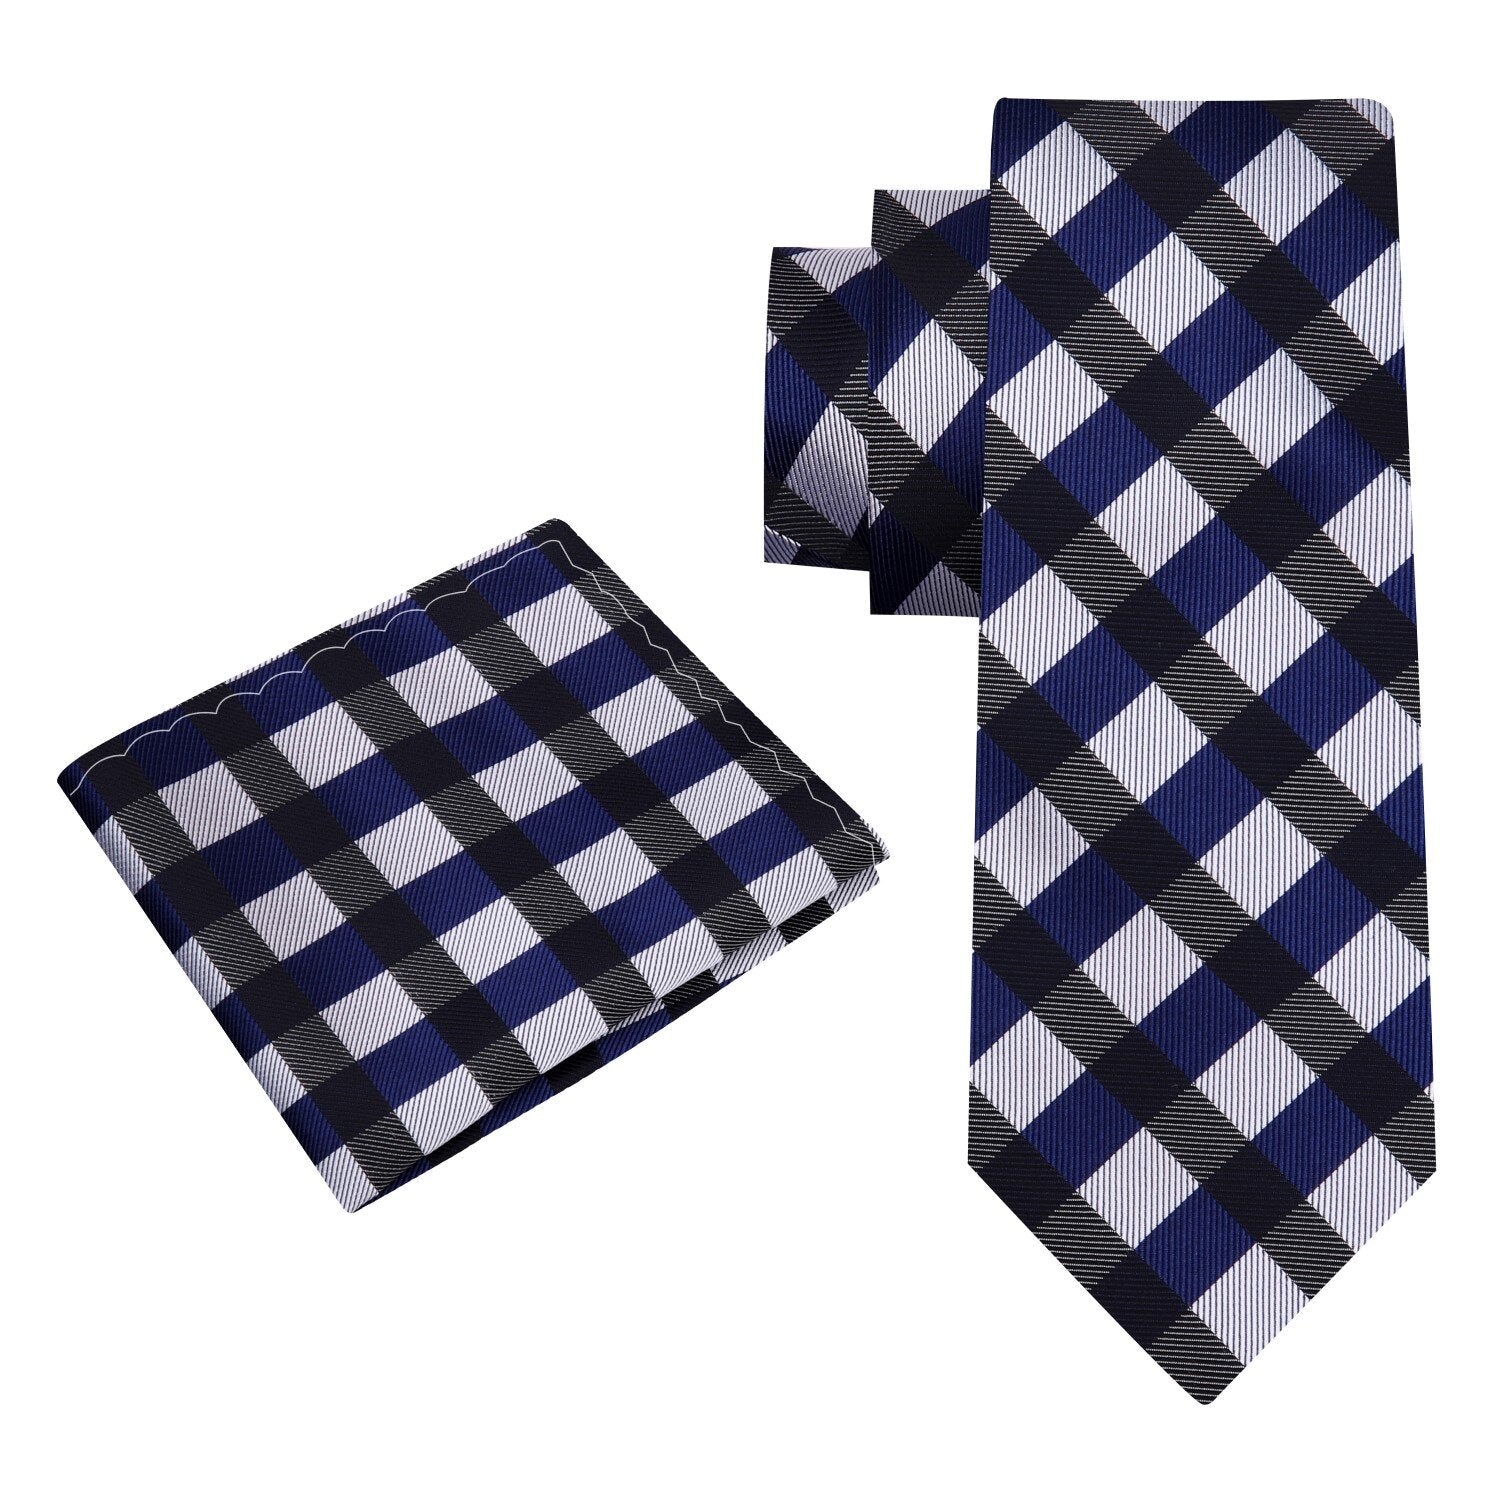 Alt View: Blue Grey Check Tie and Pocket Square